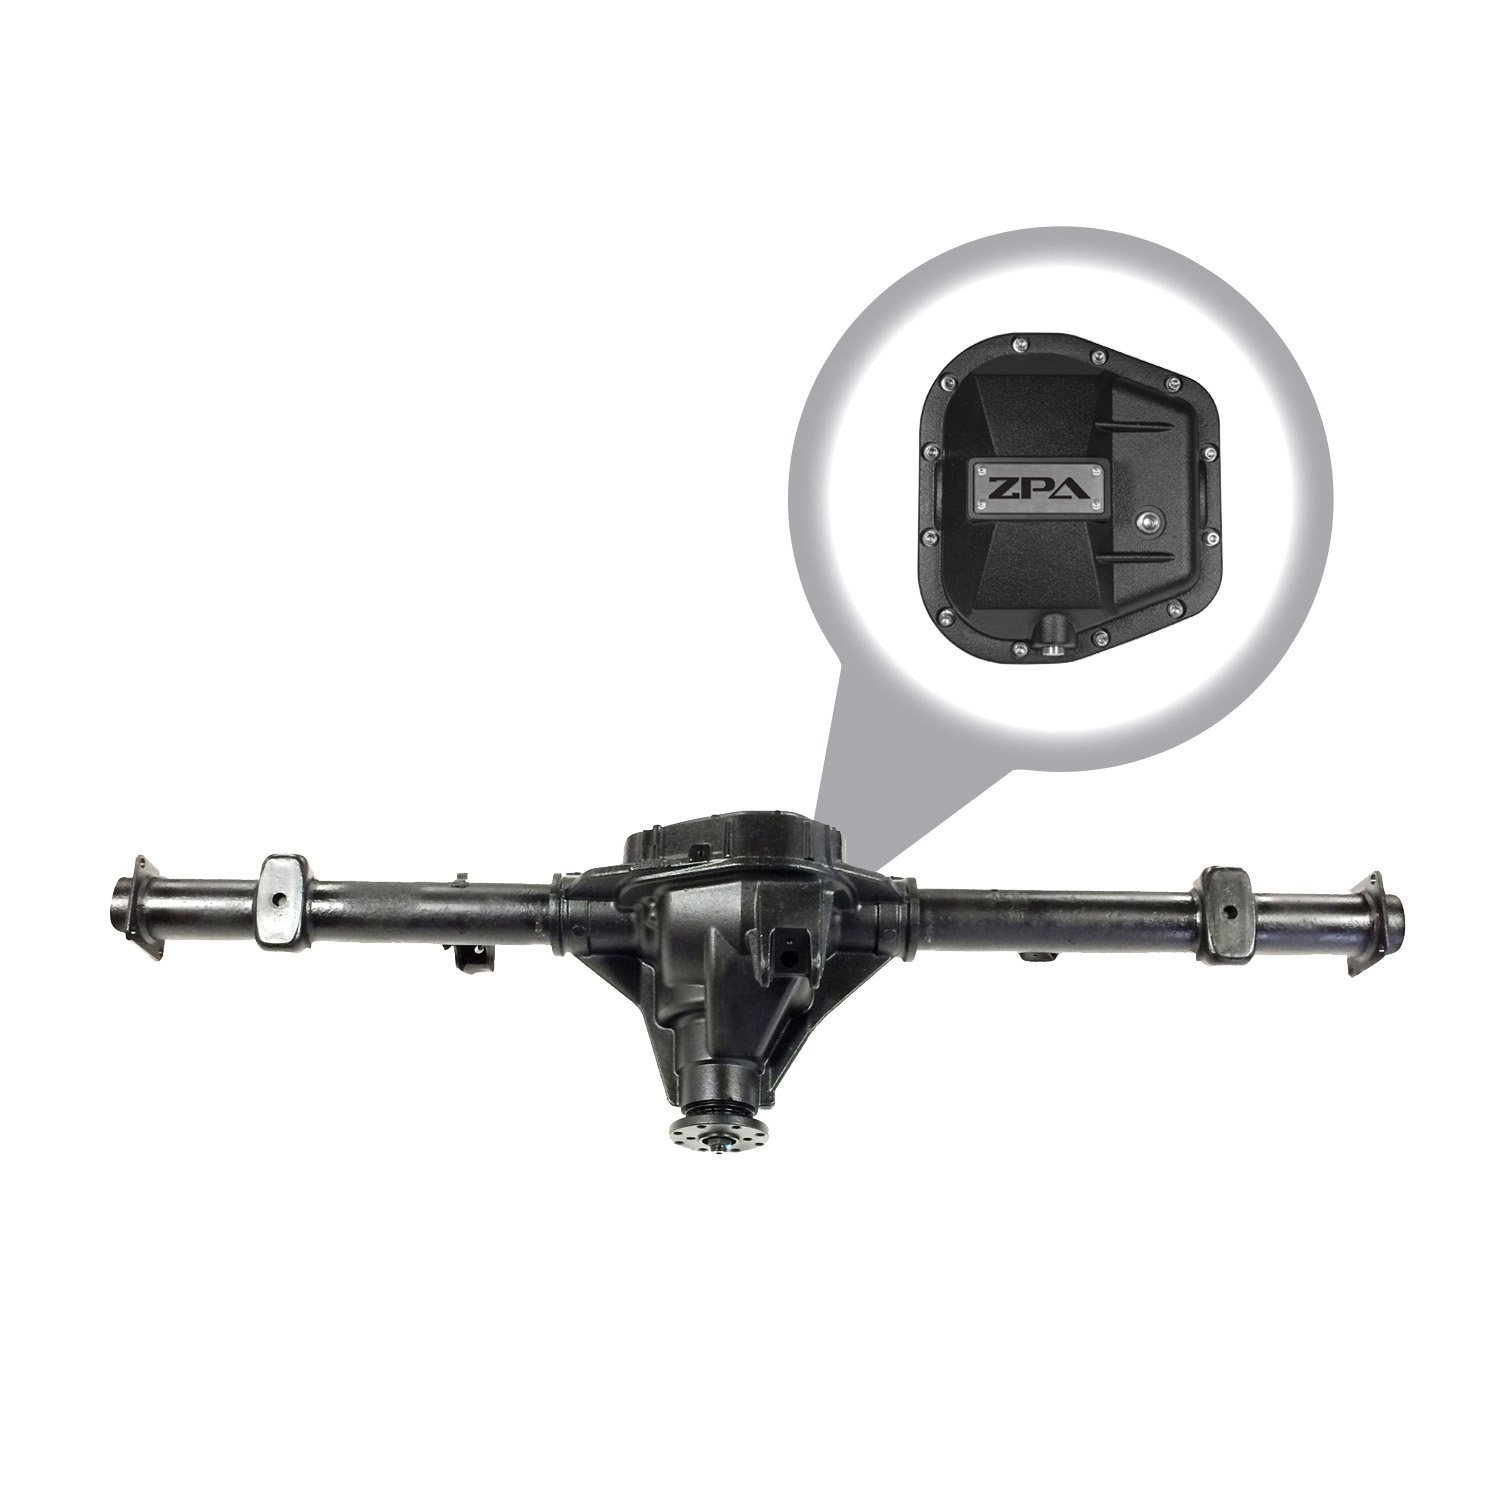 RAA435-2209X1-P Rear Axle Assembly, Ford 9.75, '04-'08 Ford F150 (Exc Heritge), 4.1 Ratio, Duragrip